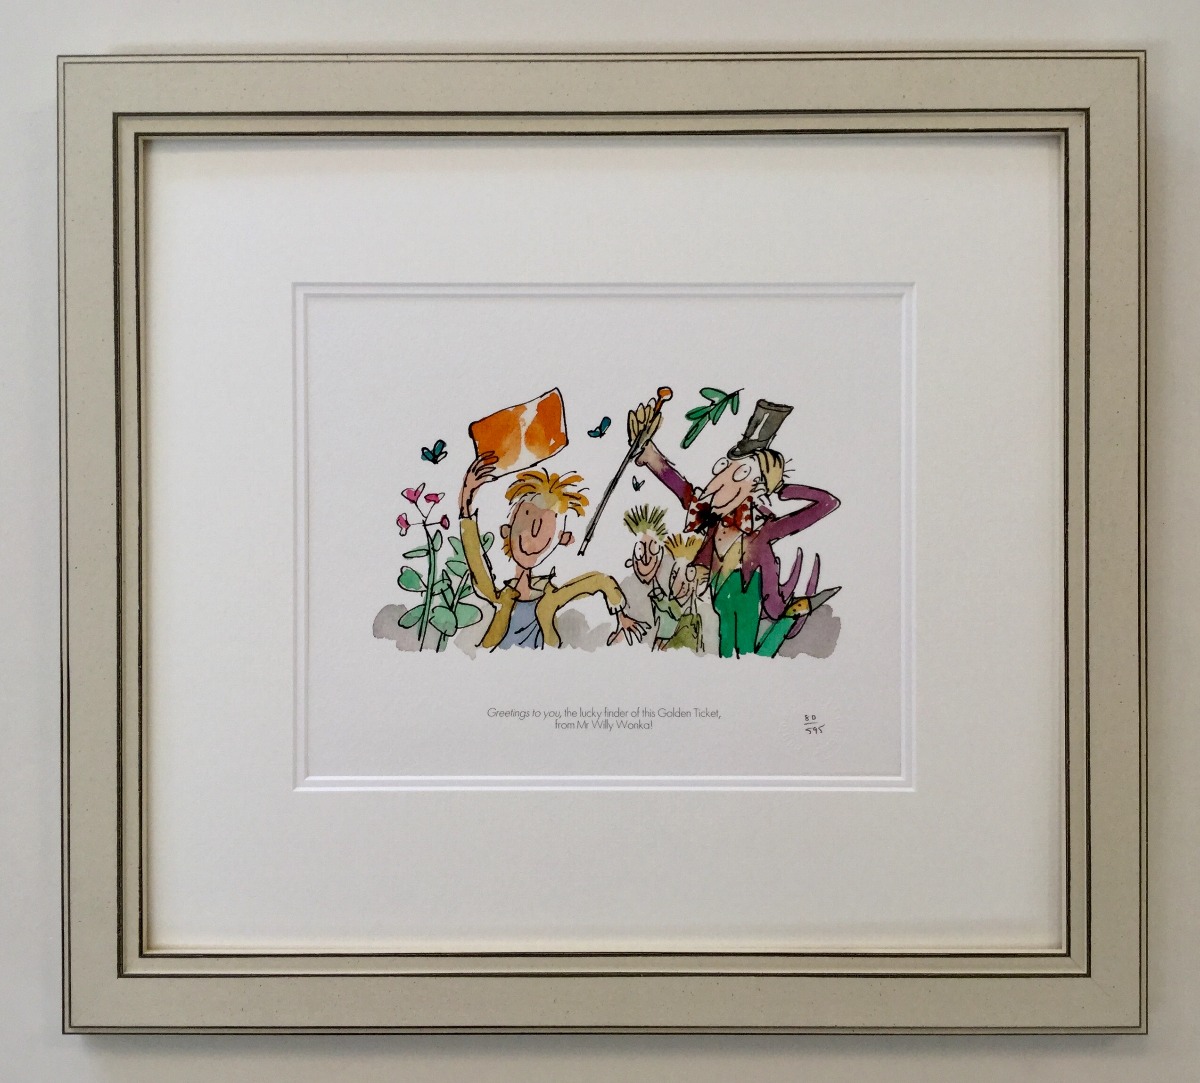 Greetings to You by Quentin Blake, dahl | Children | Nostalgic | Book | Film